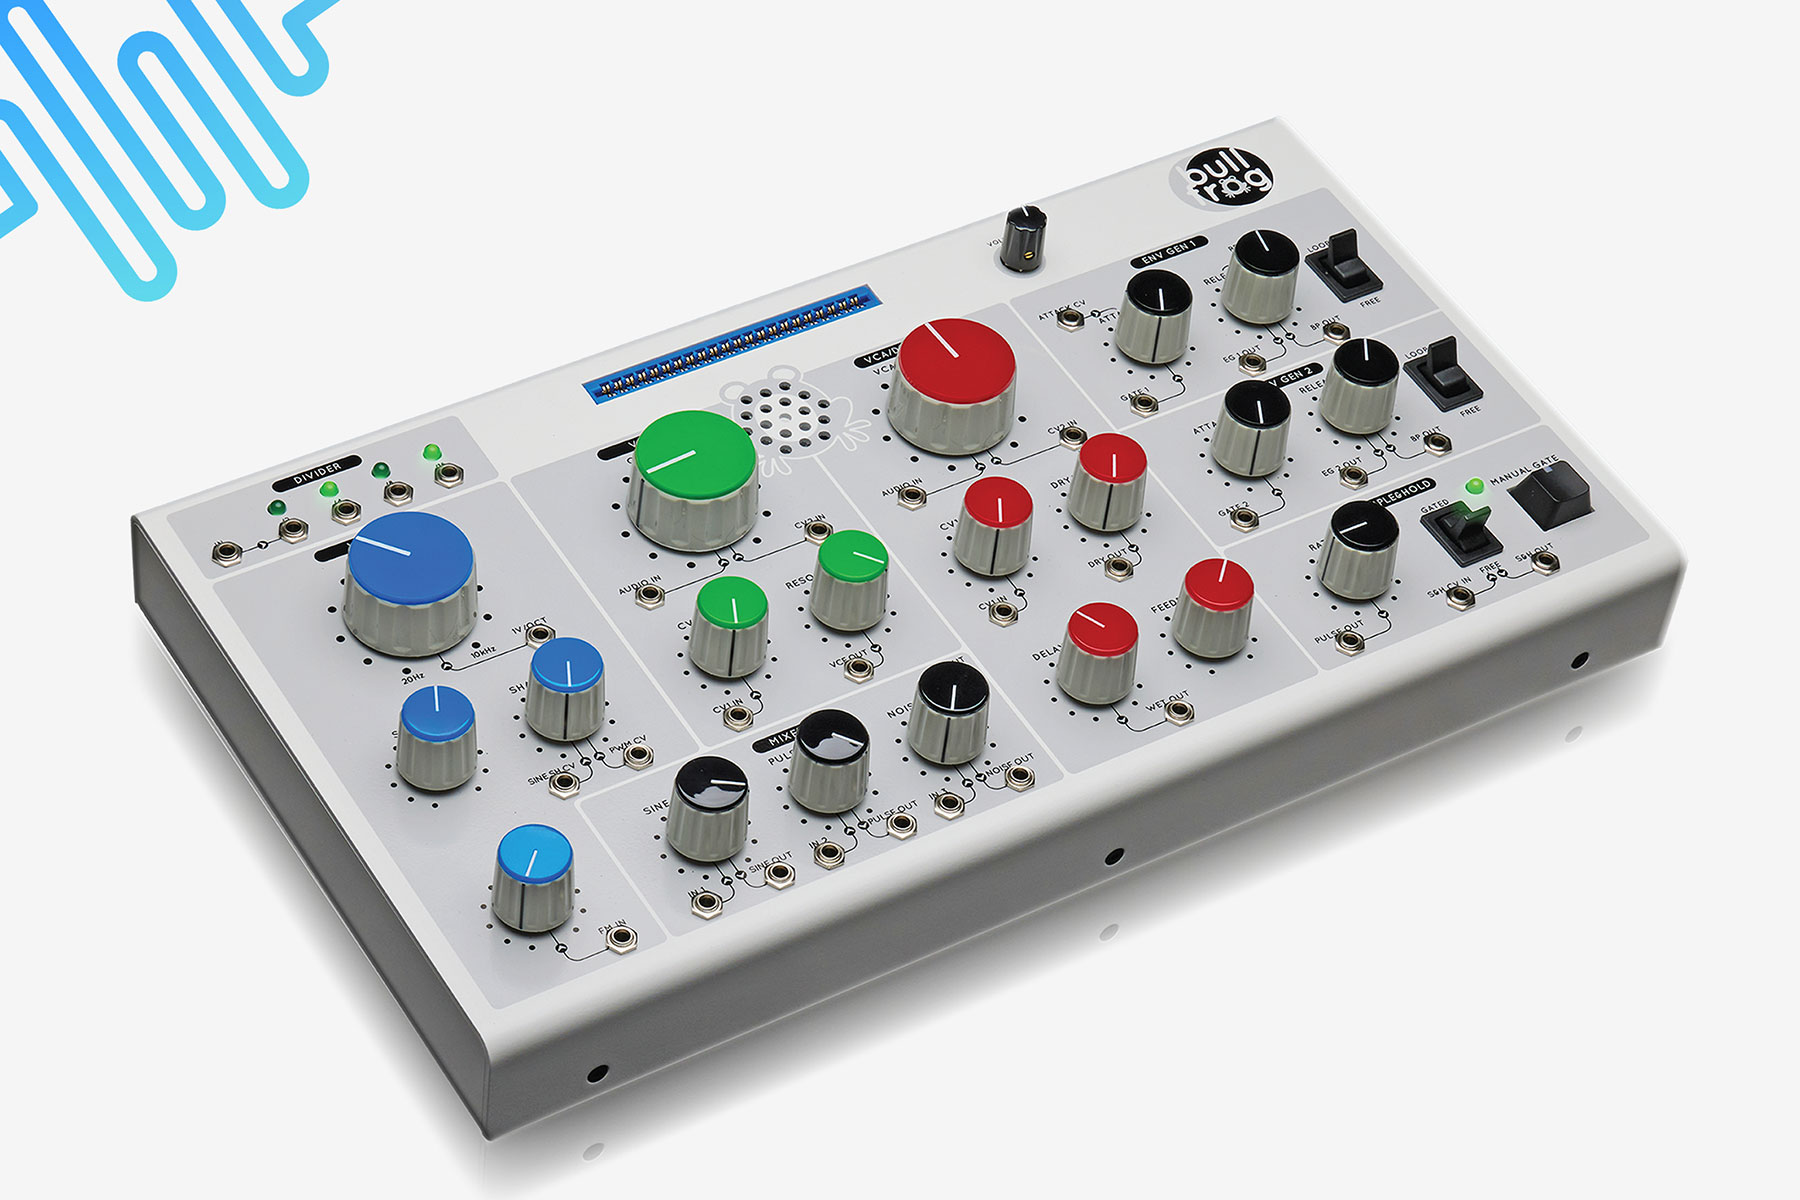 Bullfrog synth designed by Richie Hawtin and Erica Synths